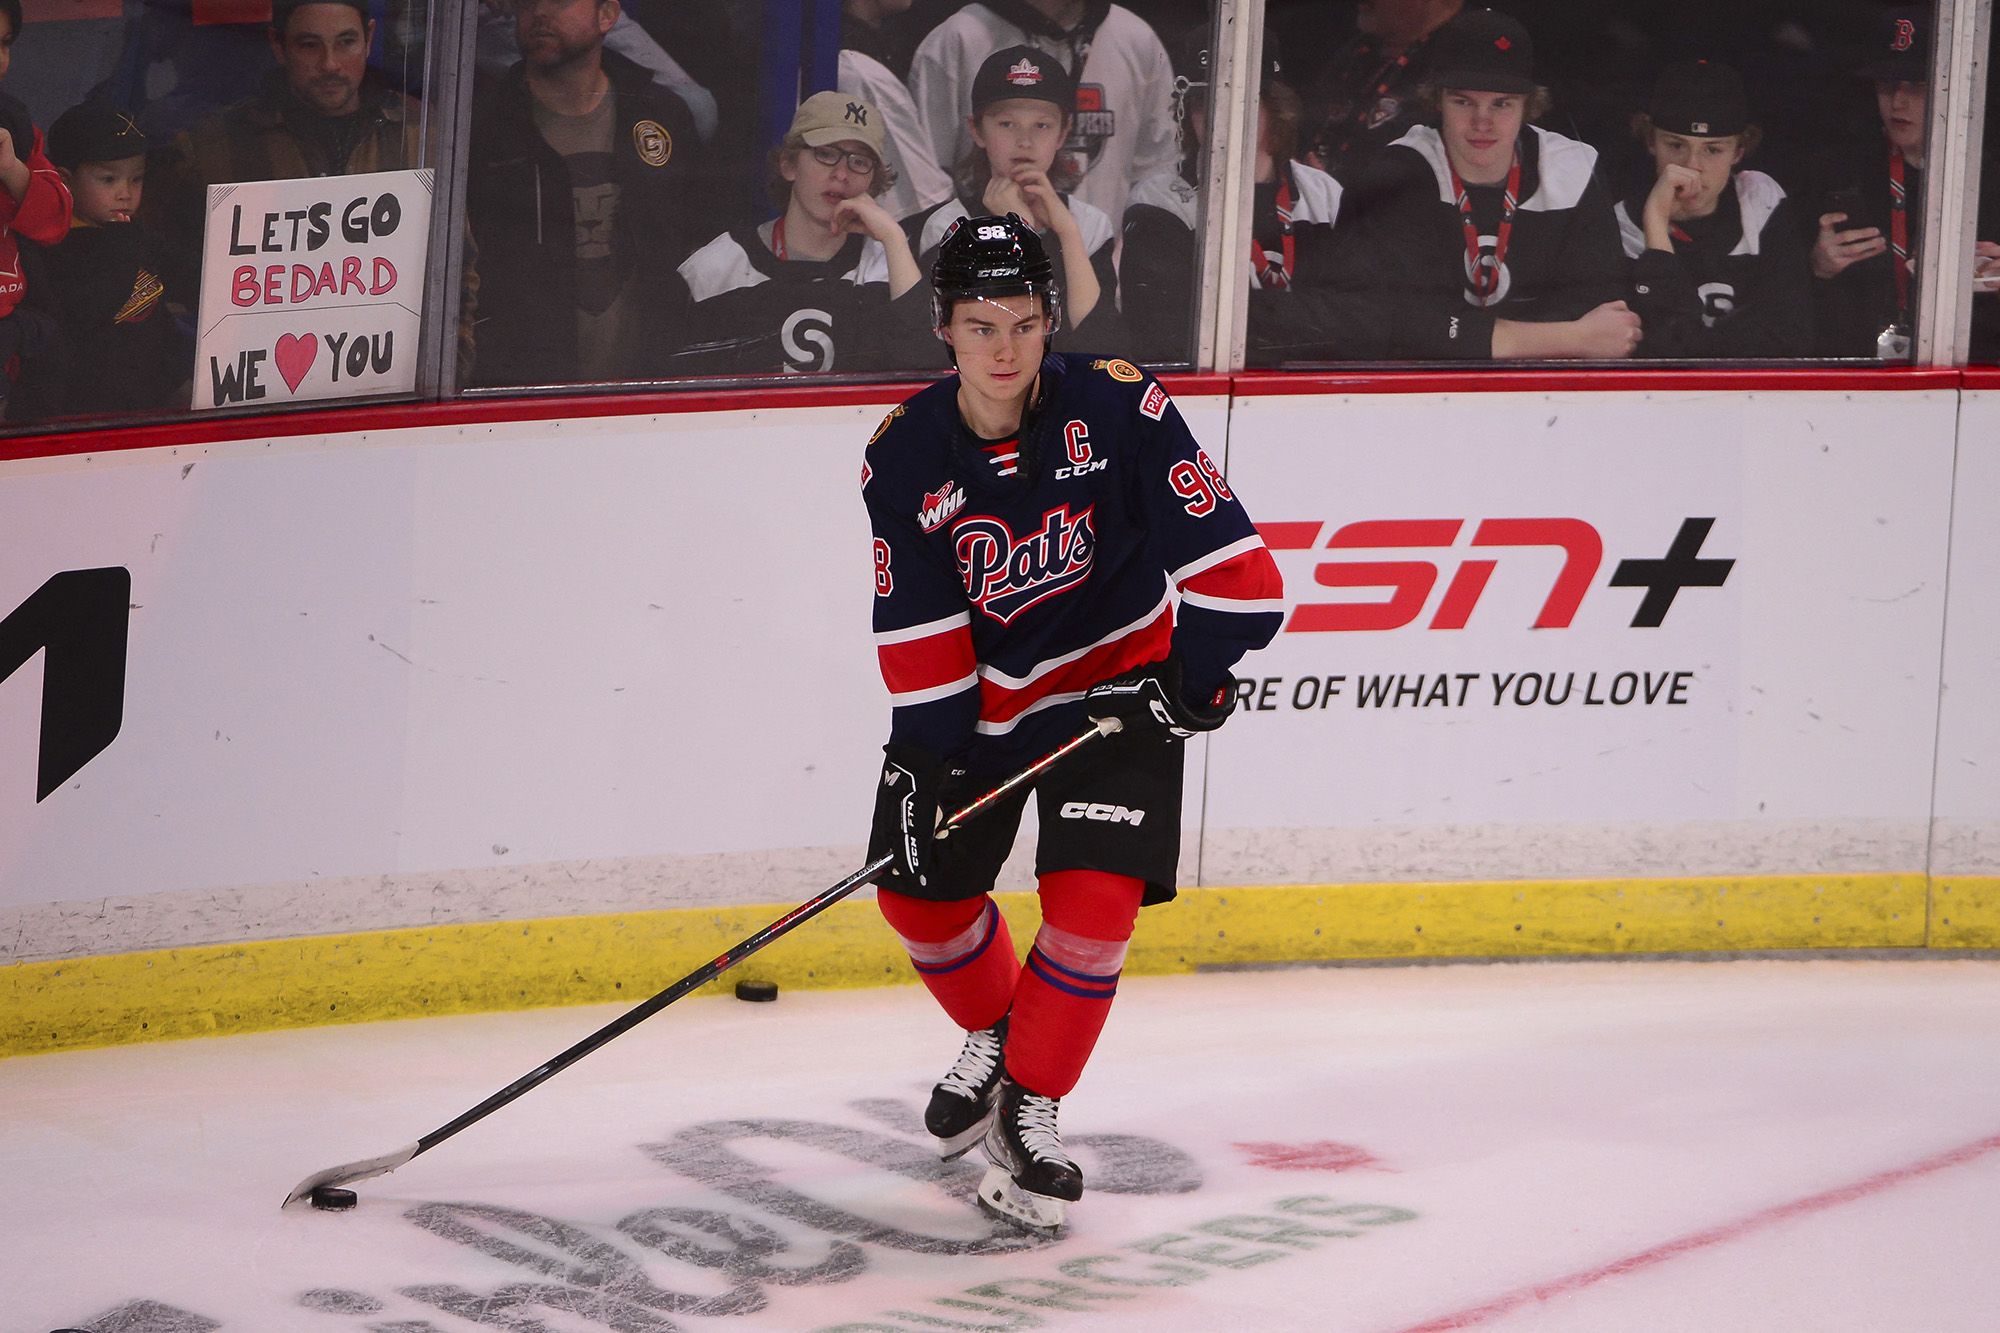 Regina Pats' Connor Bedard selected first overall by the Chicago Blackhawks